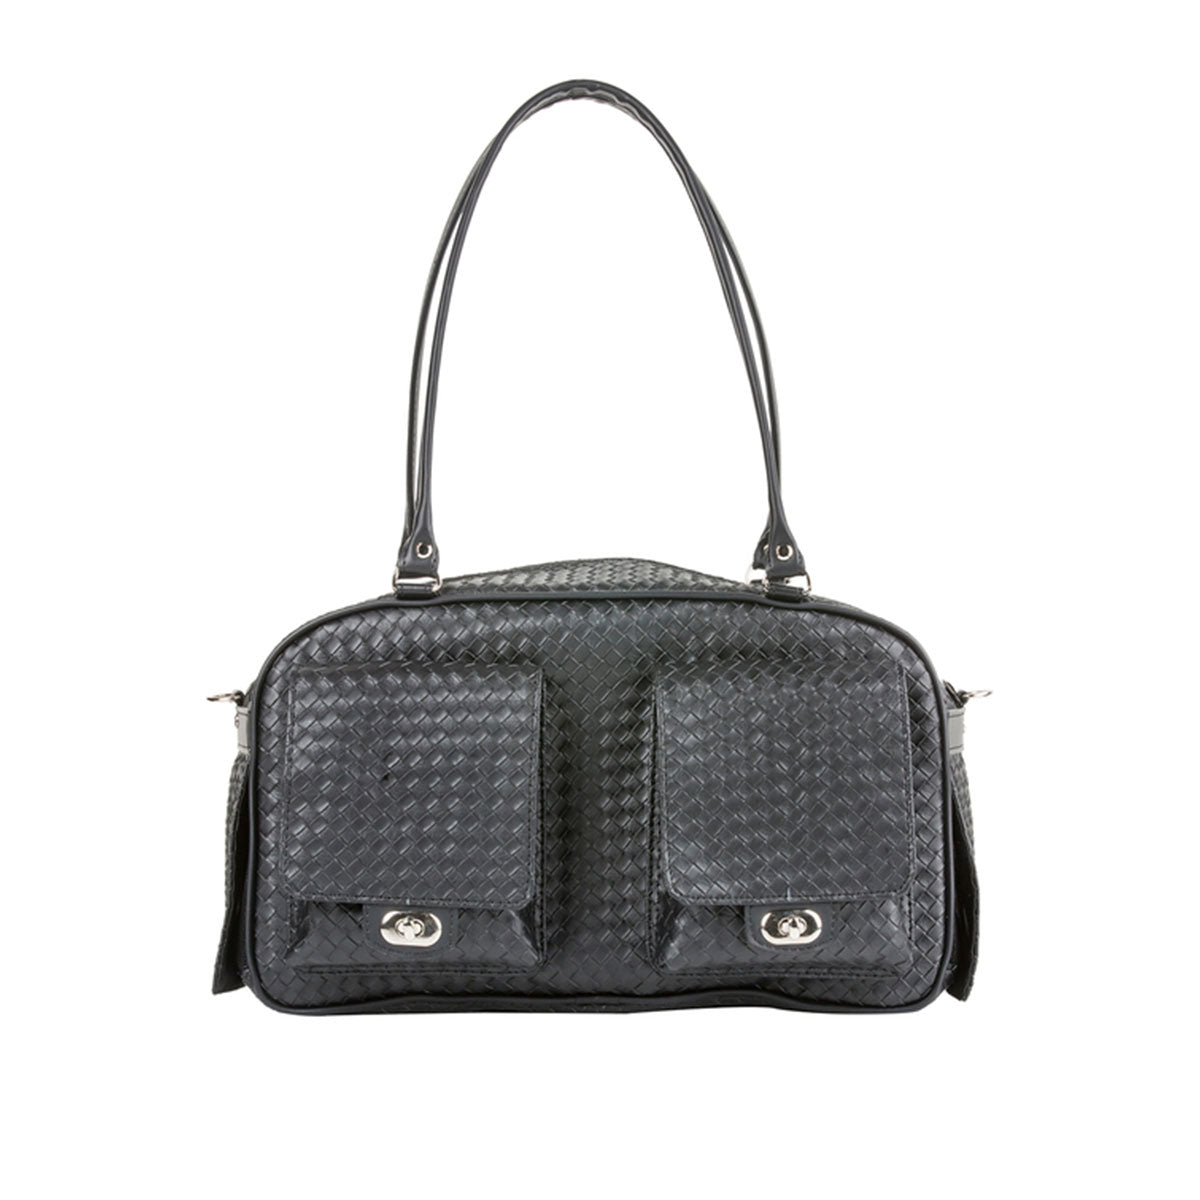 Marlee Pet Carrier - Black Woven | Pawlicious & Company